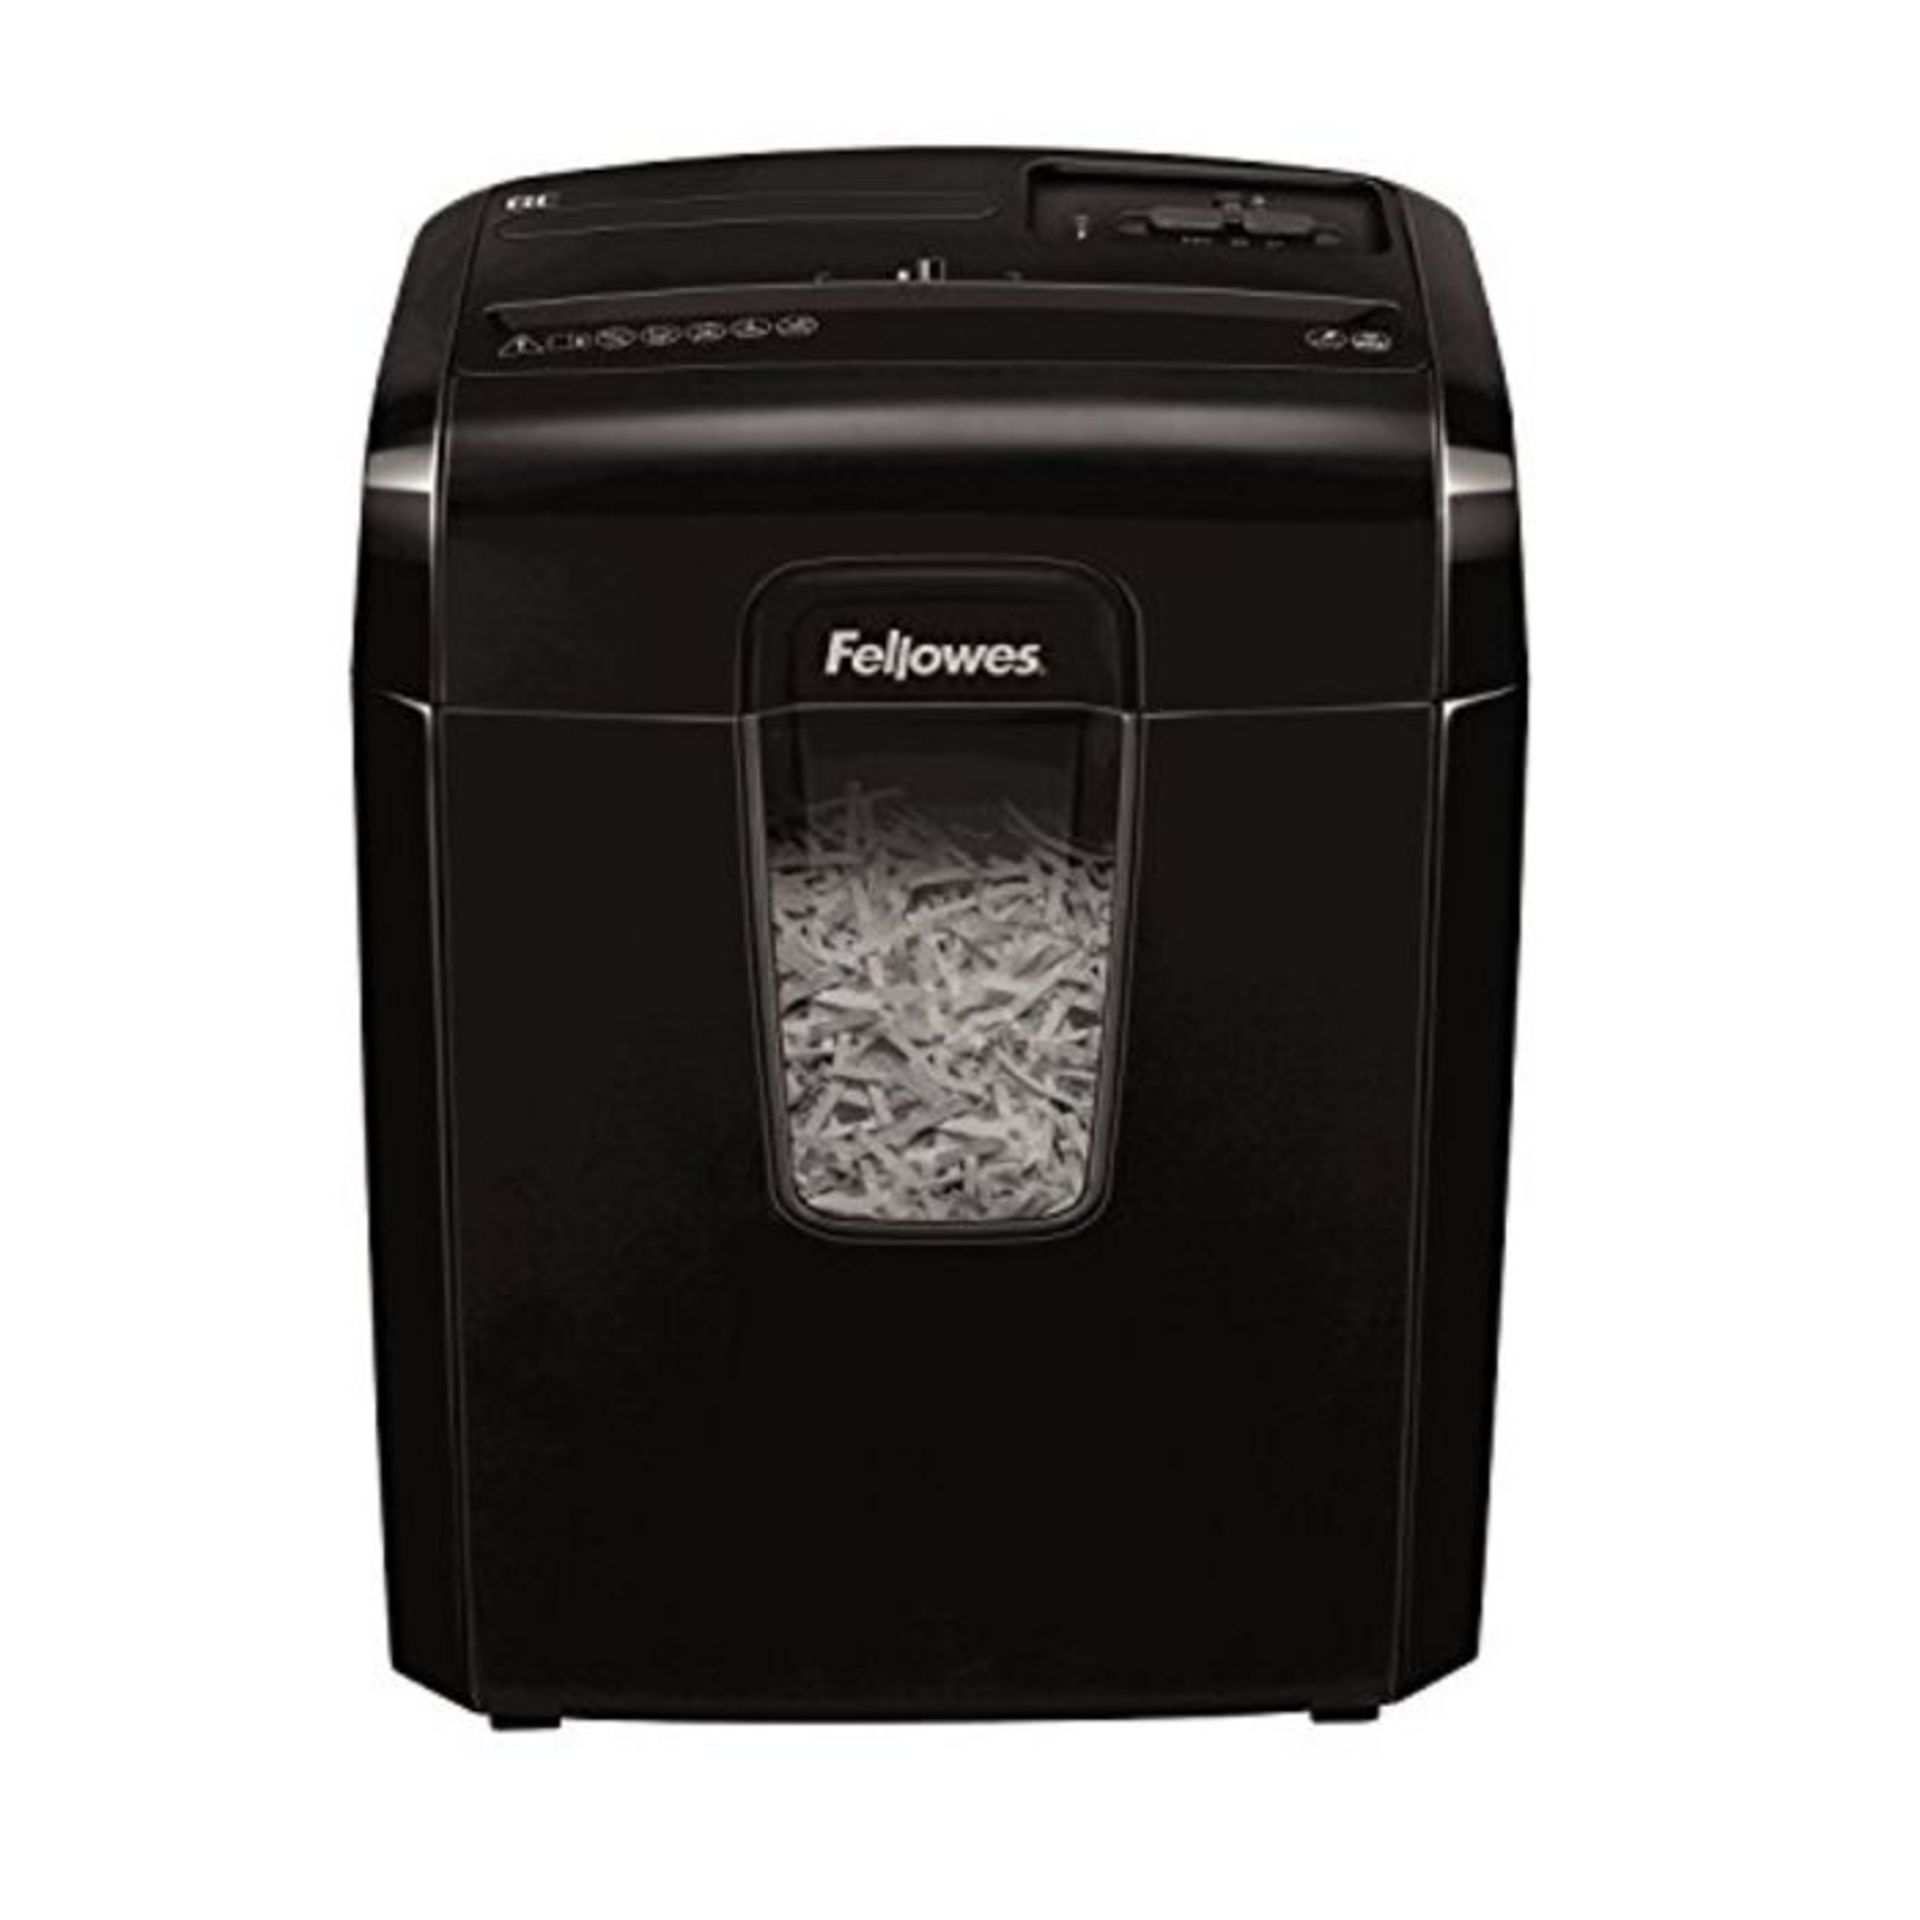 Fellowes Powershred 8C Personal 8 Sheet Cross Cut Paper Shredder for Home Use - With S